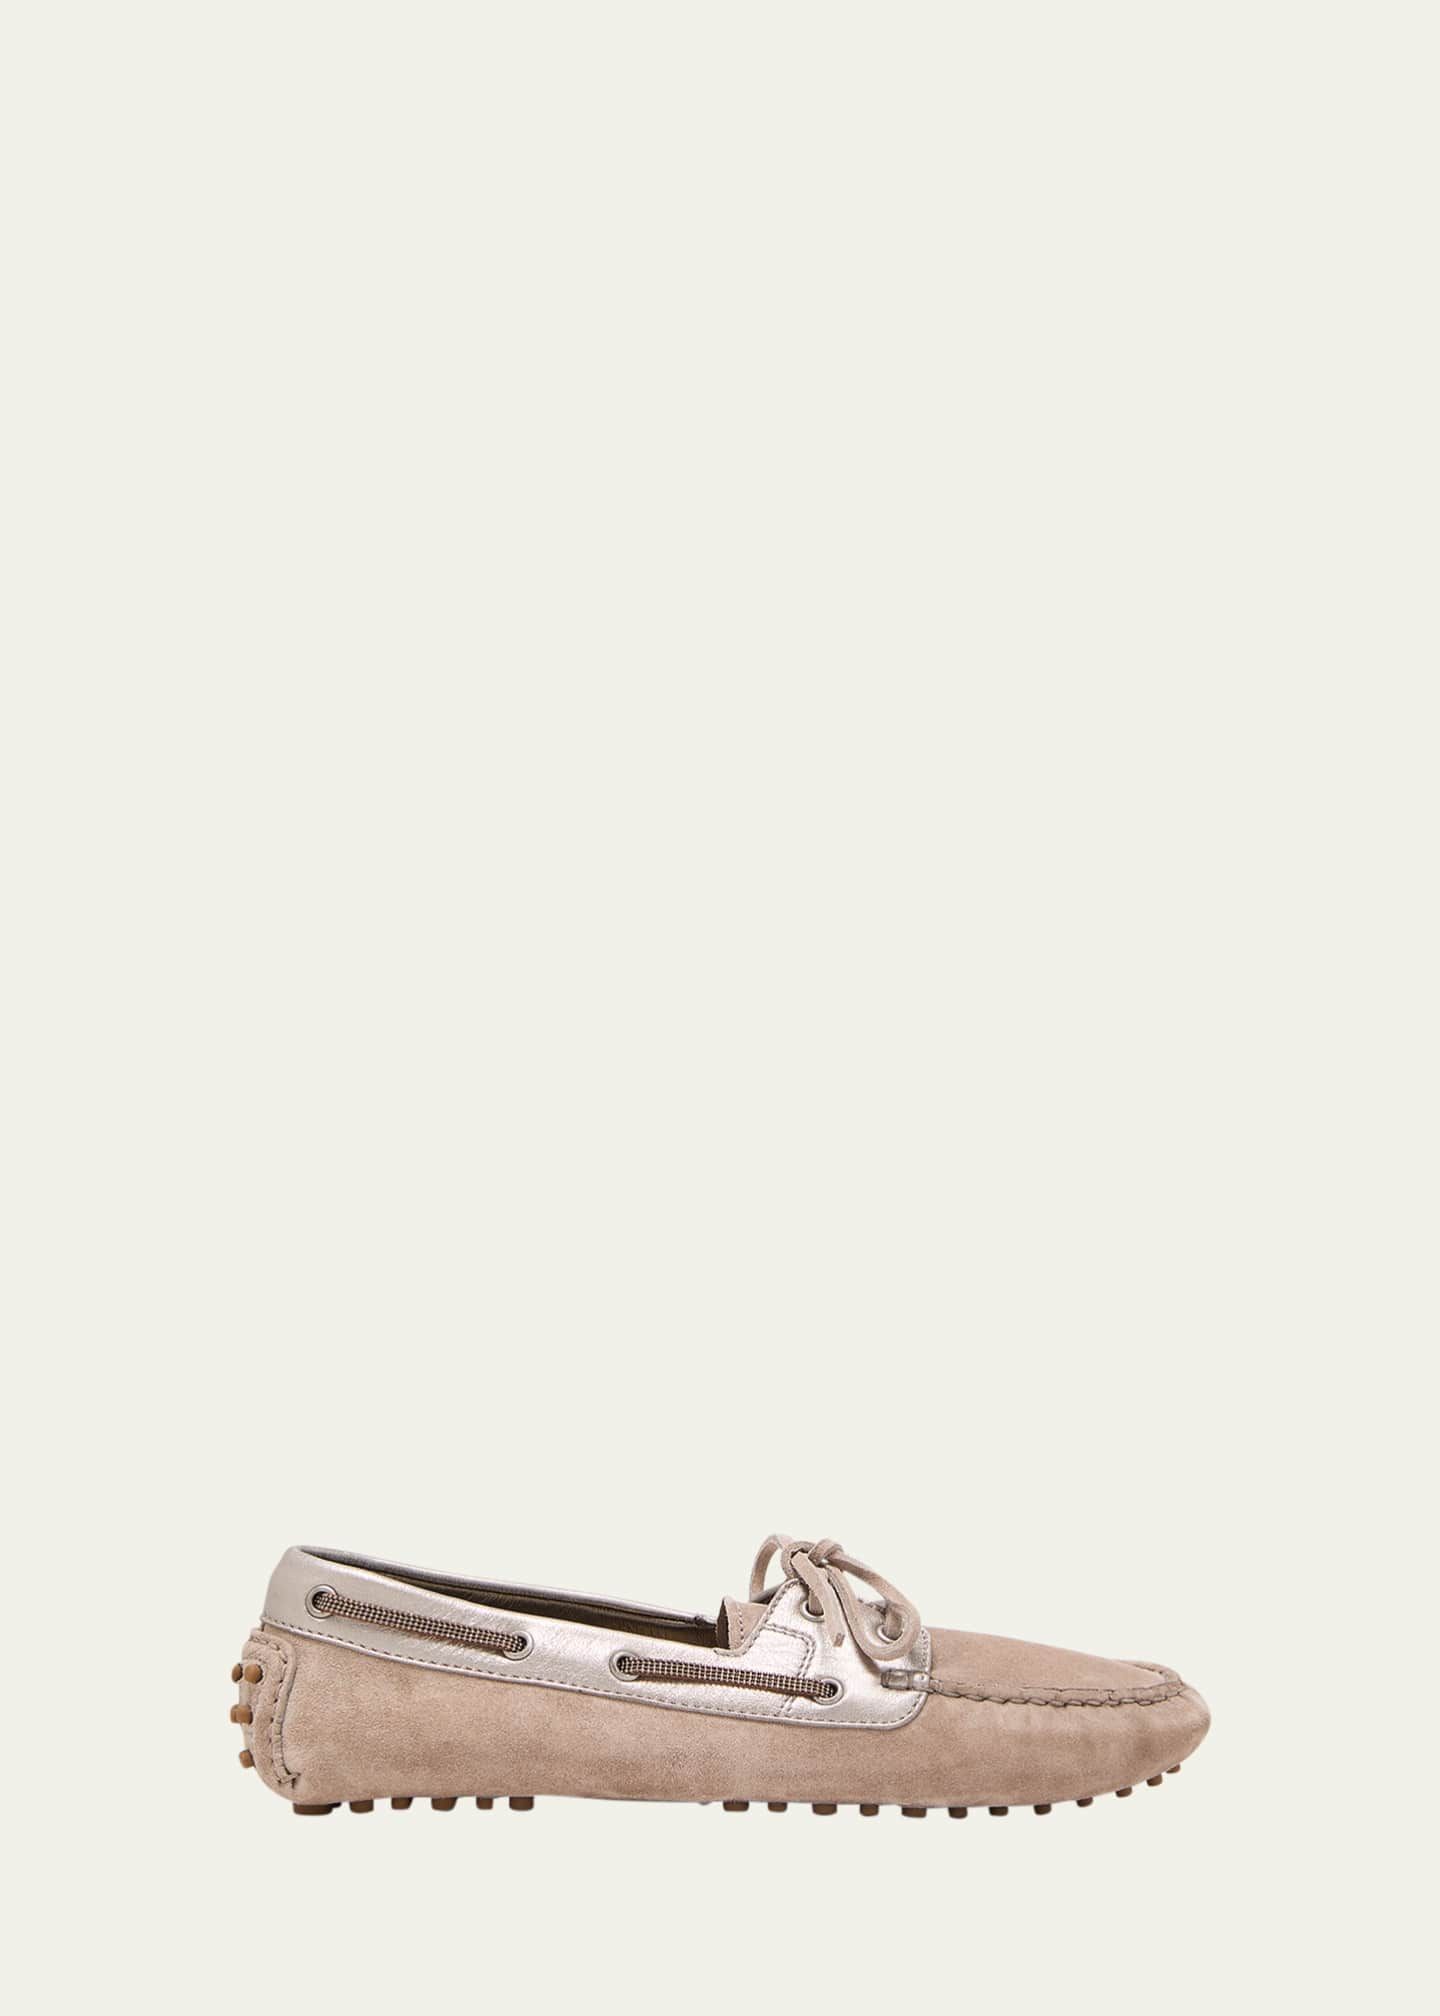 Car Shoe slip-on driving loafers - Neutrals